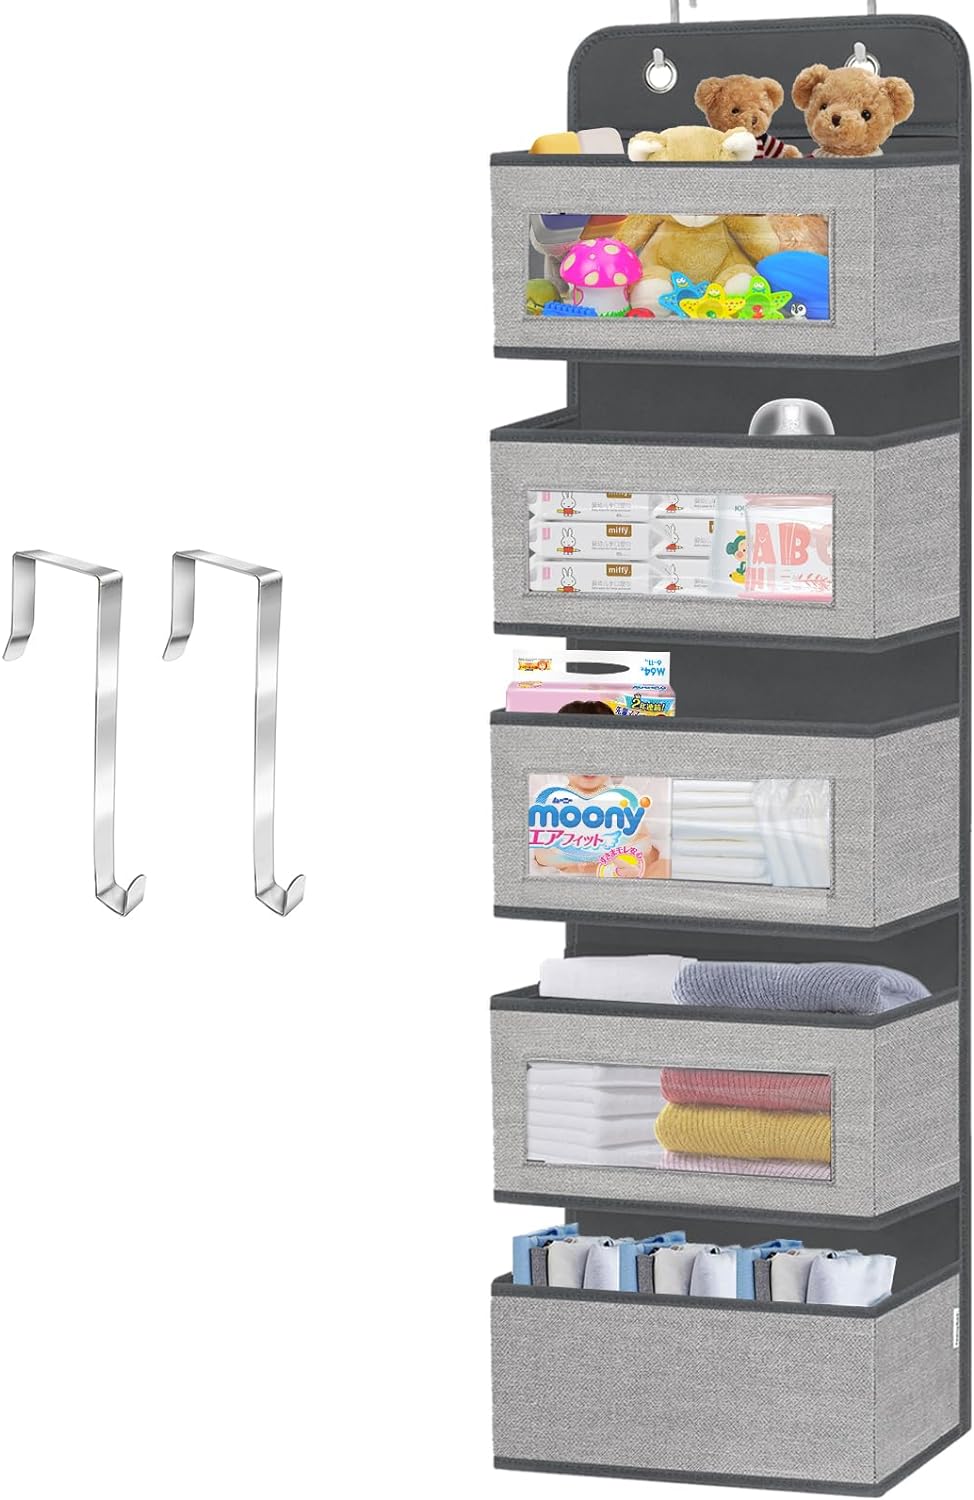 VERONLY Over Door Hanging Organizer storage with 5 Pockets, Wall Mount Storage with Clear Windows, 2 Widened Metal Hooks Behind Door Storage Organizer for Pantry, Nursery, Diapers, Closet, Dorm